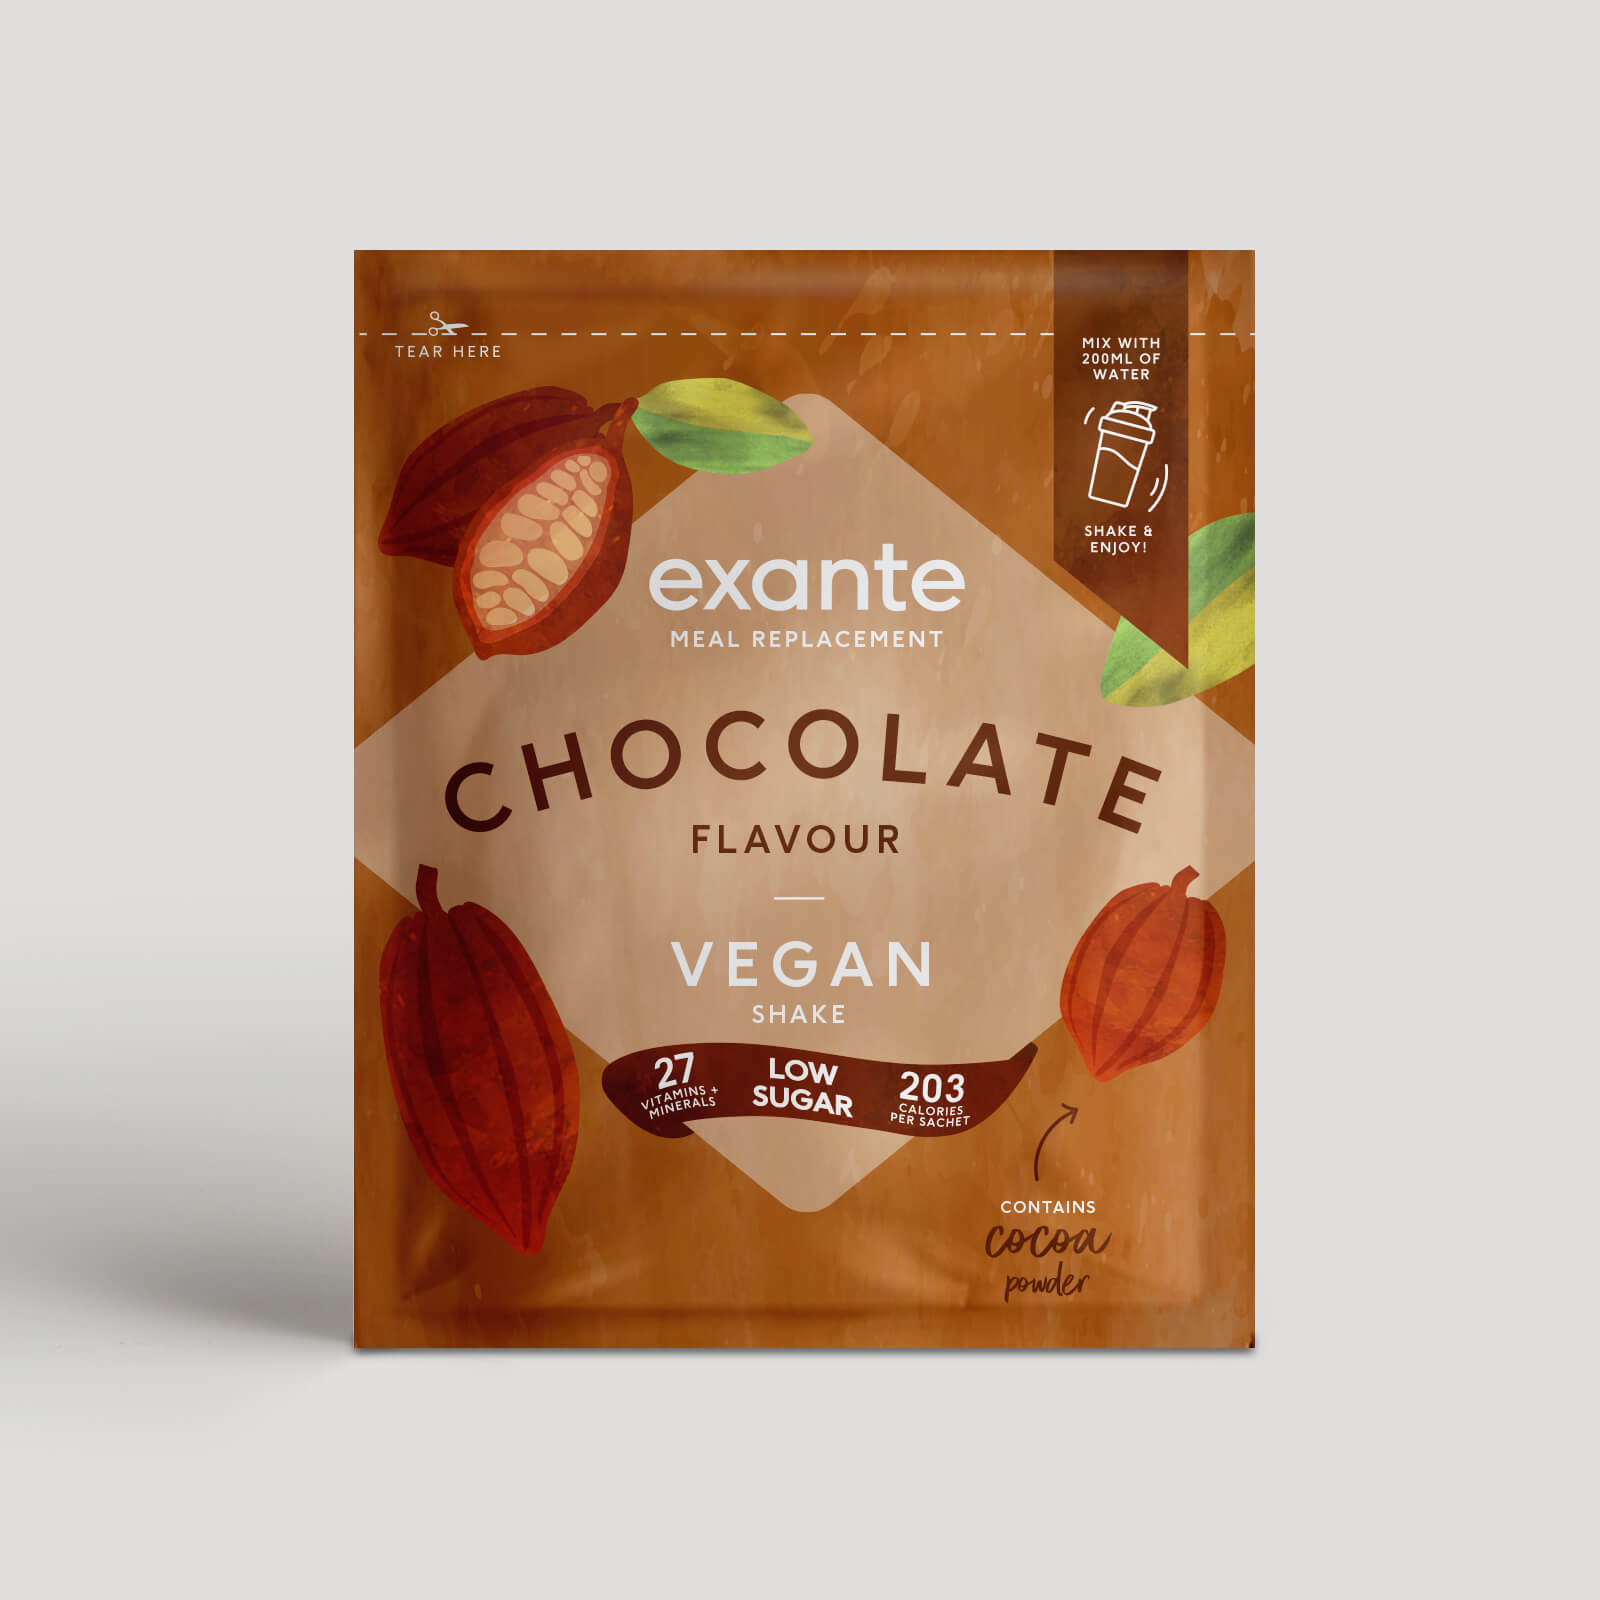 Exante Diet Vegan Meal Replacement Box of 7 Chocolate Shakes